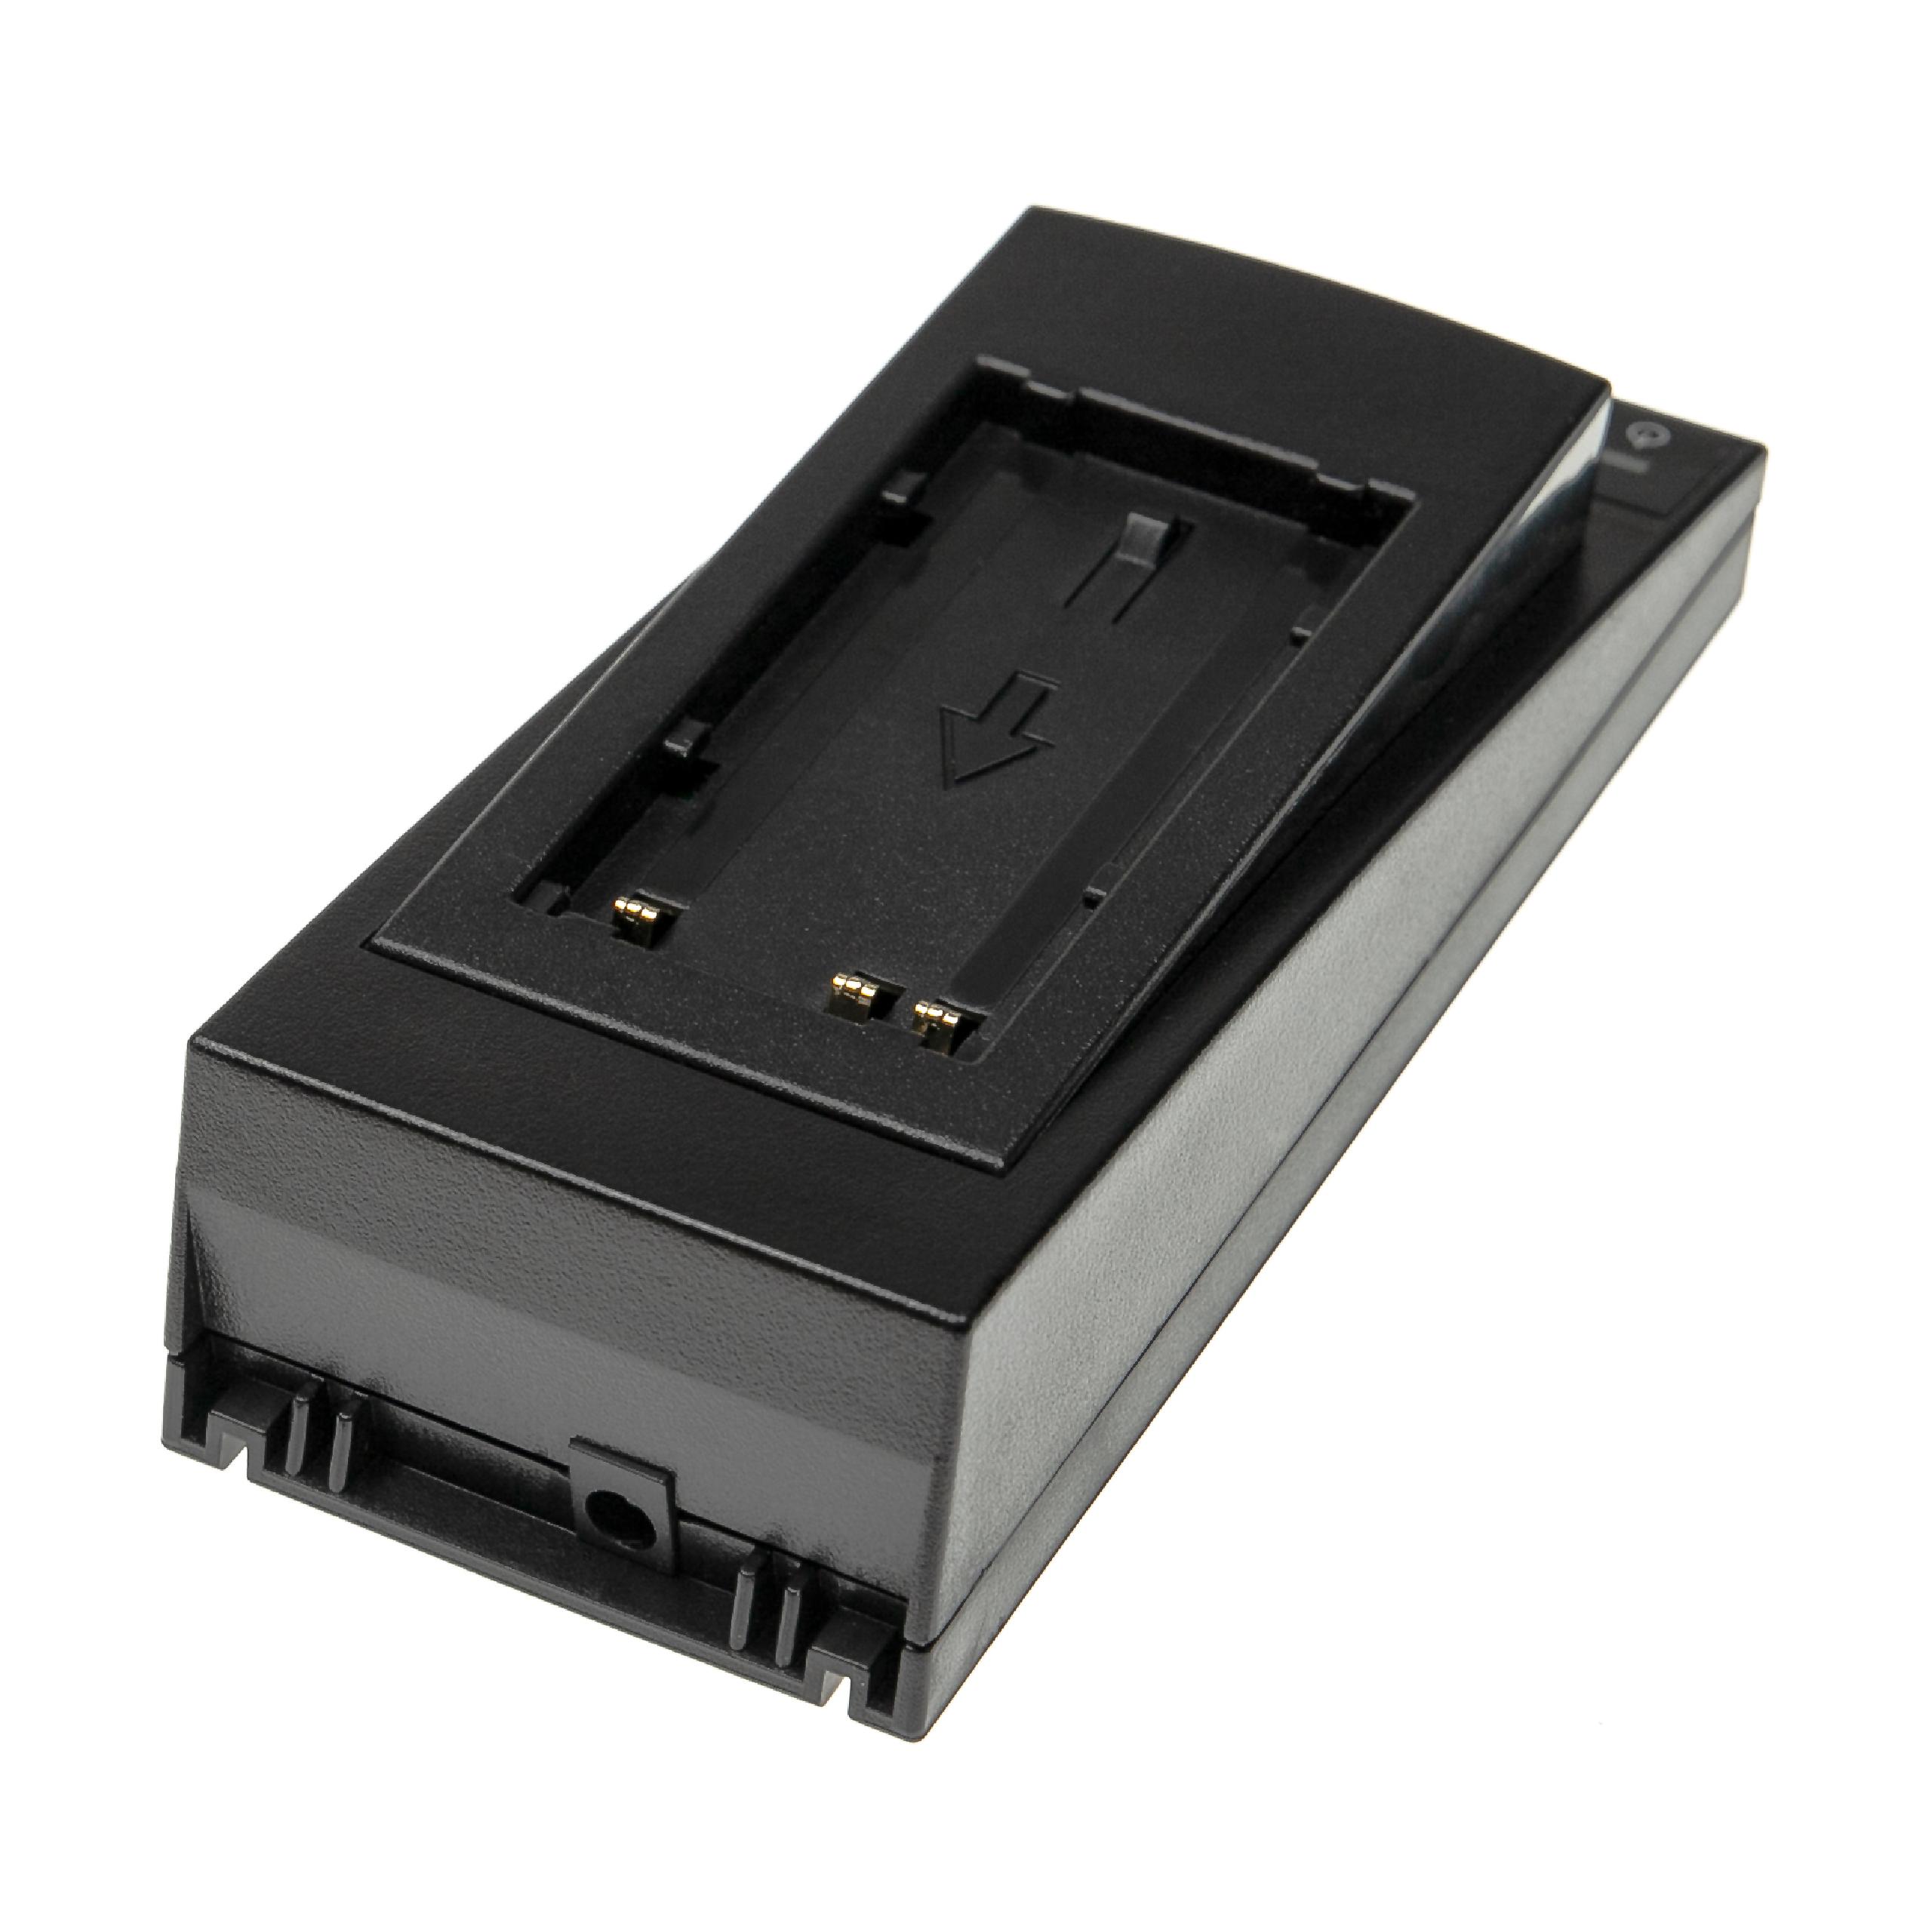 Charger Suitable for Leica Measuring Tool / Battery etc. - Charge Dock + In-Car Cable, 7.5 V / 1.5 A